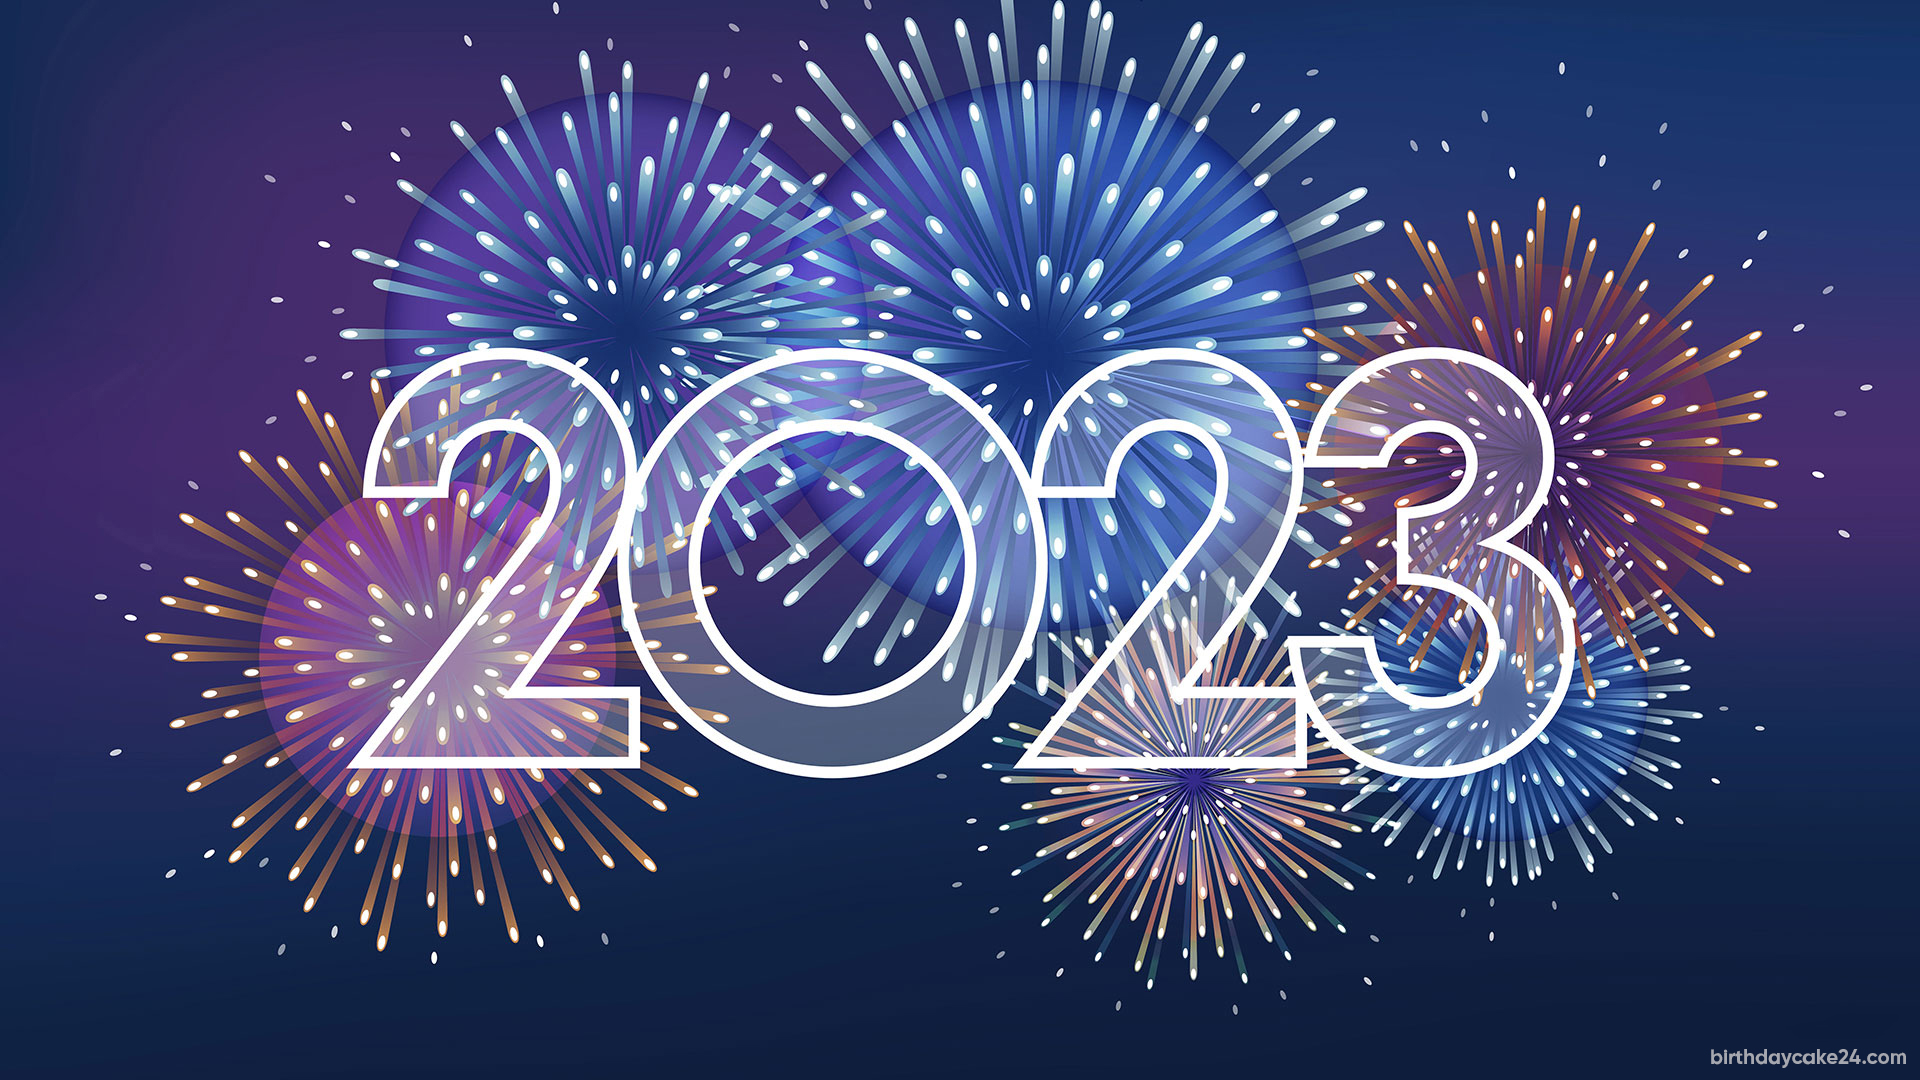 New Year Wallpapers HD Images 2023 Download Happy New Year 2023